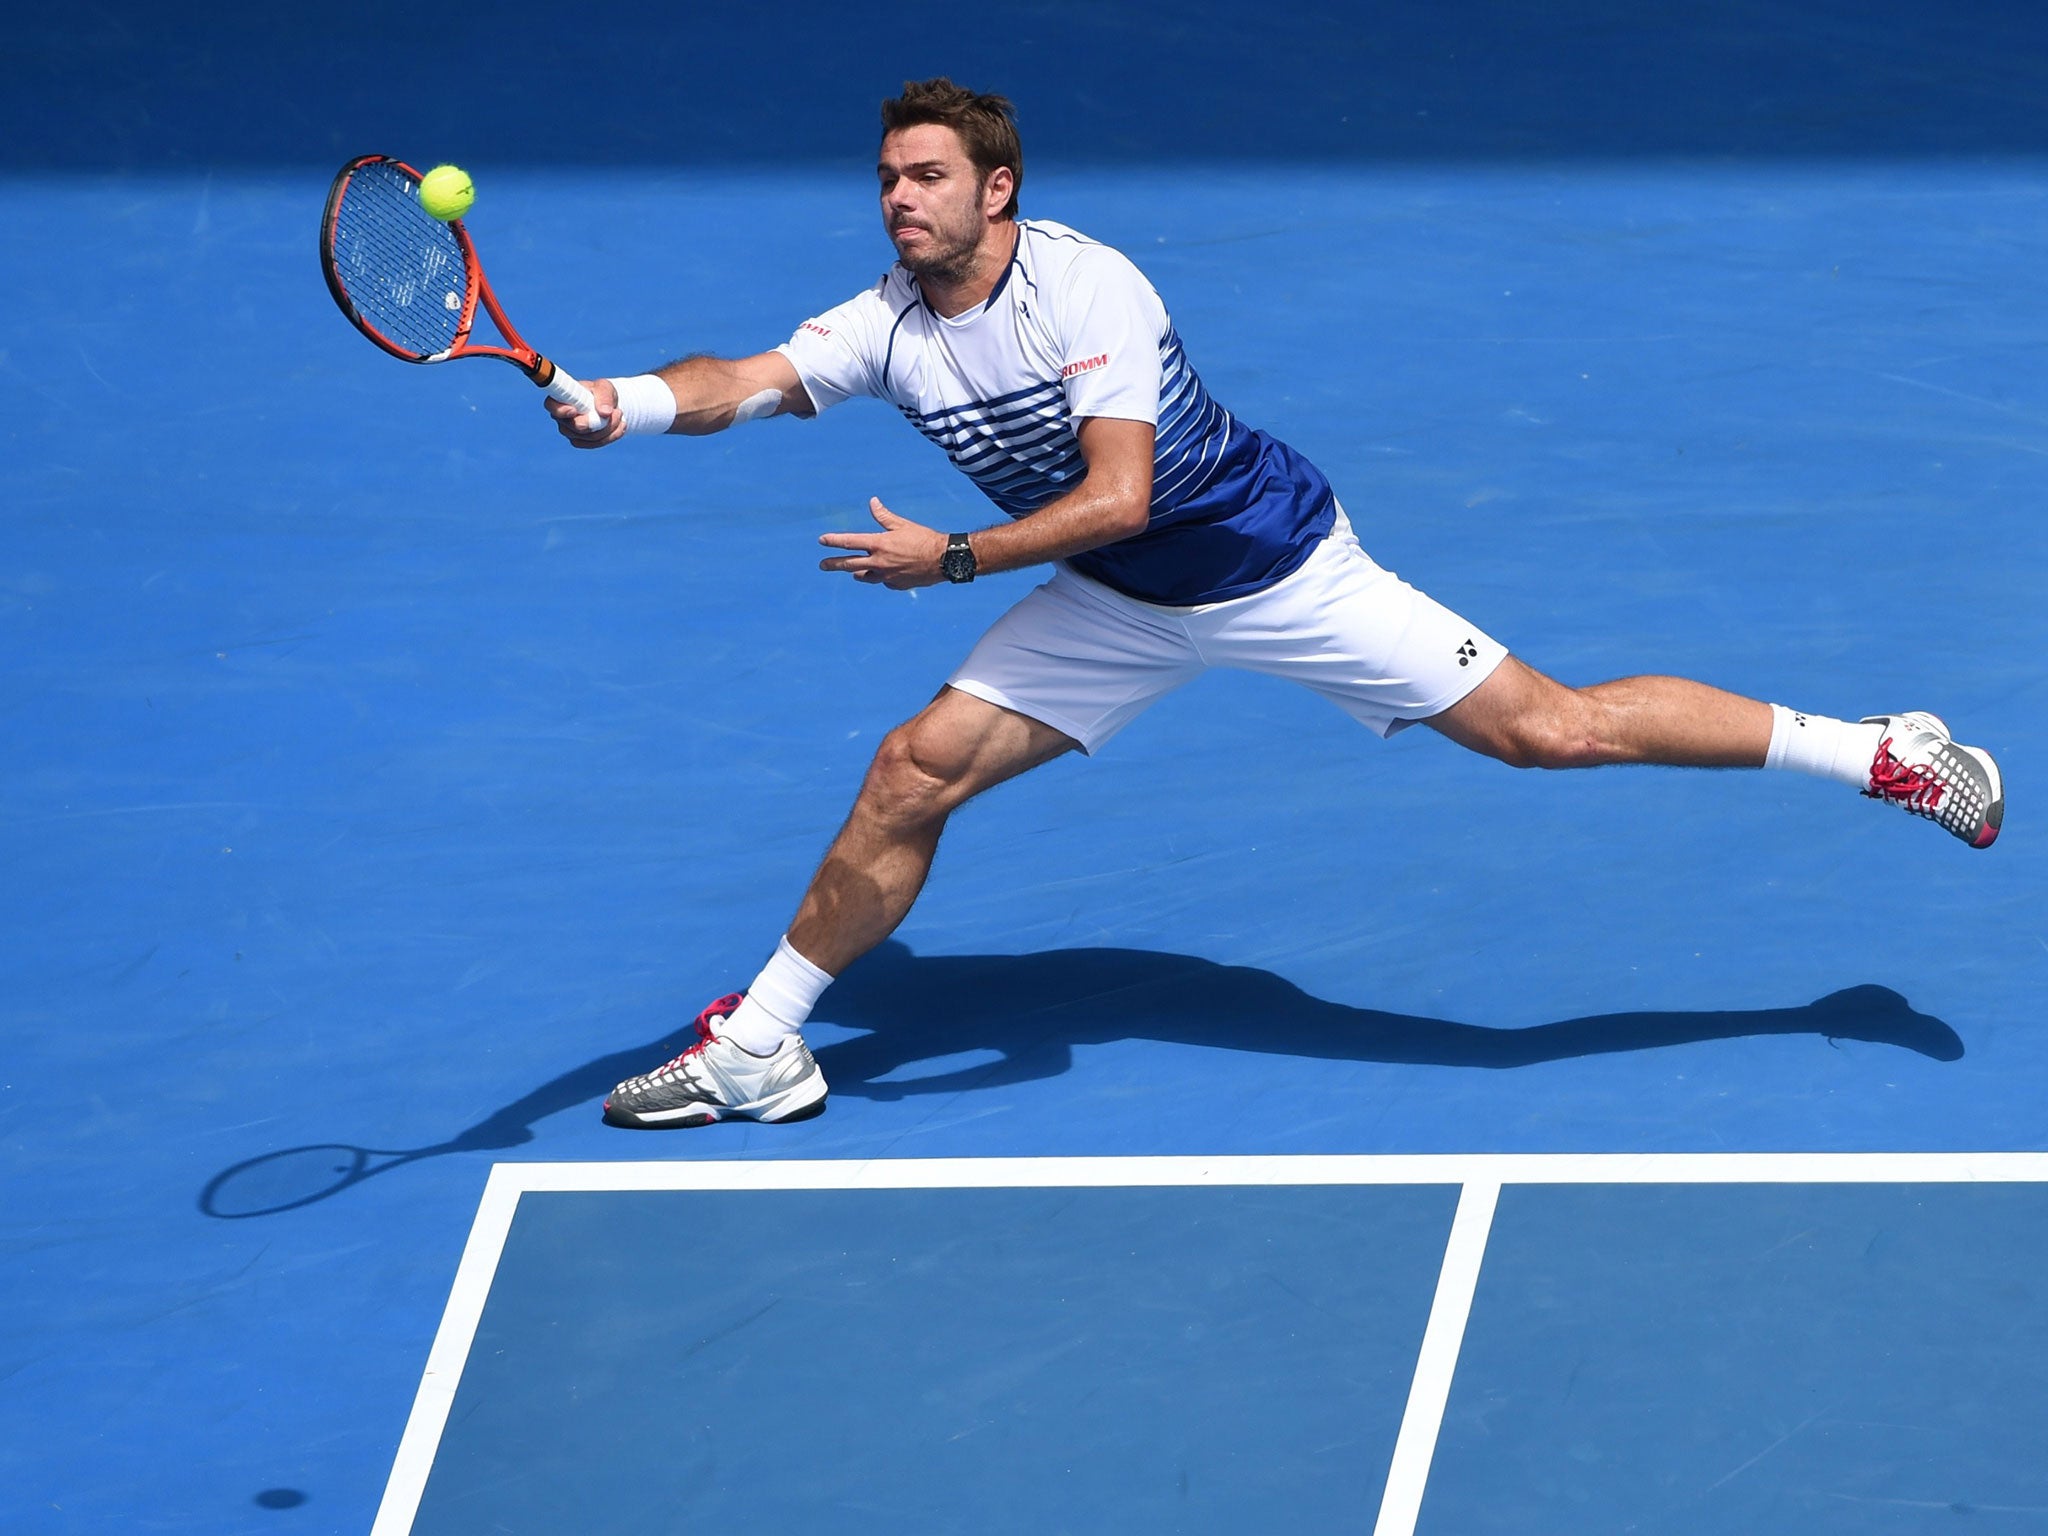 Stan Wawrinka came through his fourth round match against Guillermo Garcia-Lopez to reach the quarter-finals